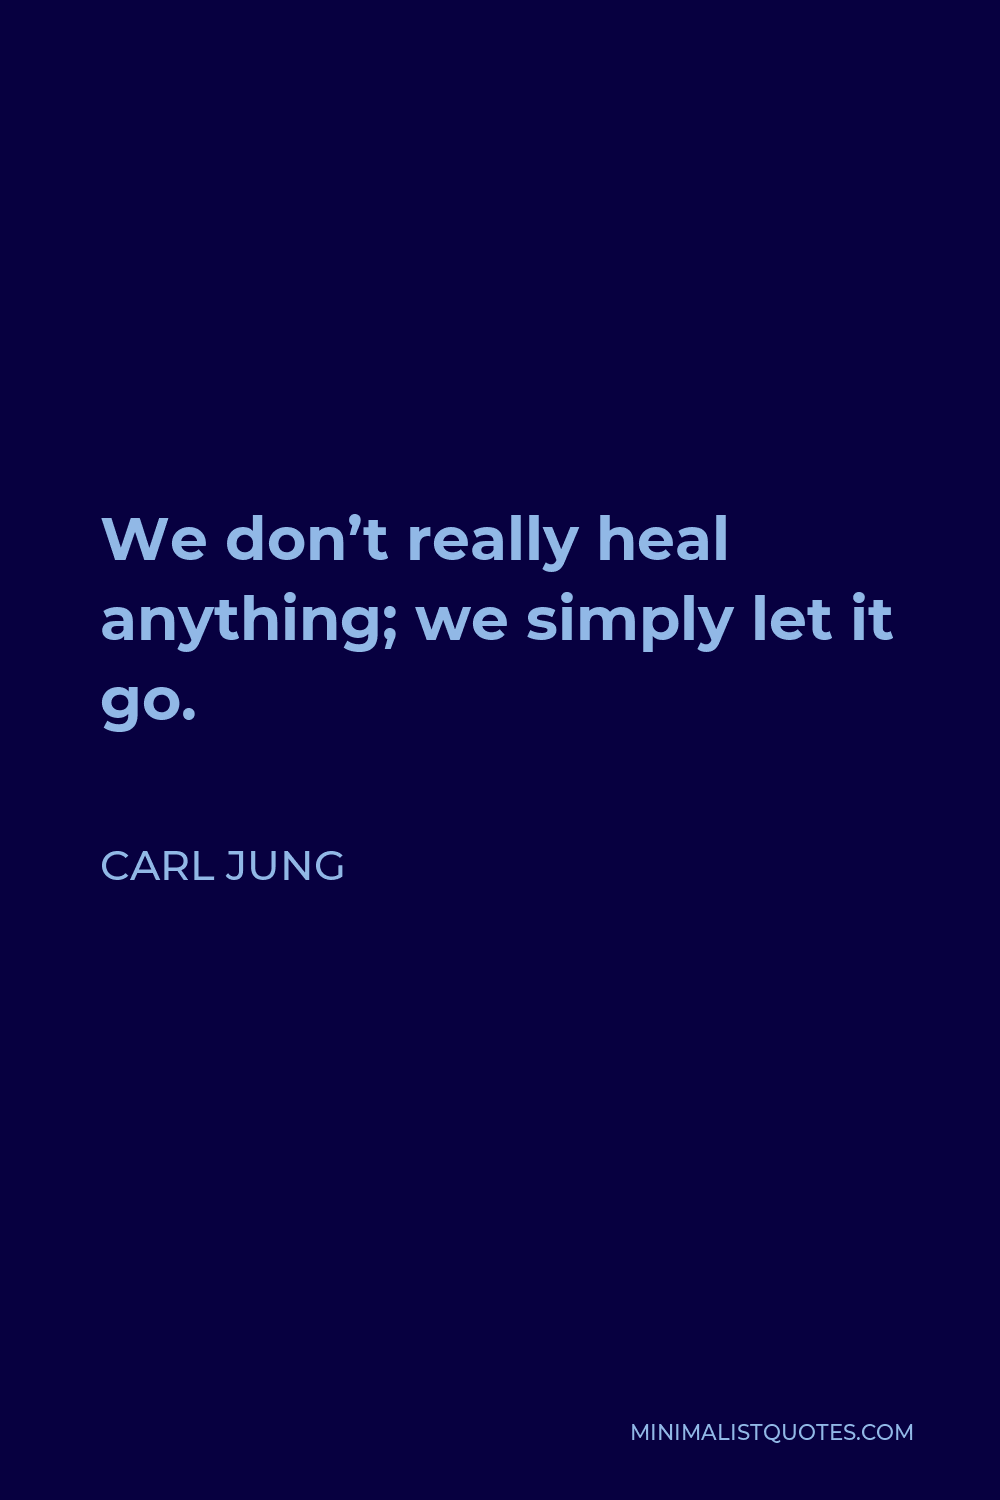 Carl Jung Quote - We don’t really heal anything; we simply let it go.